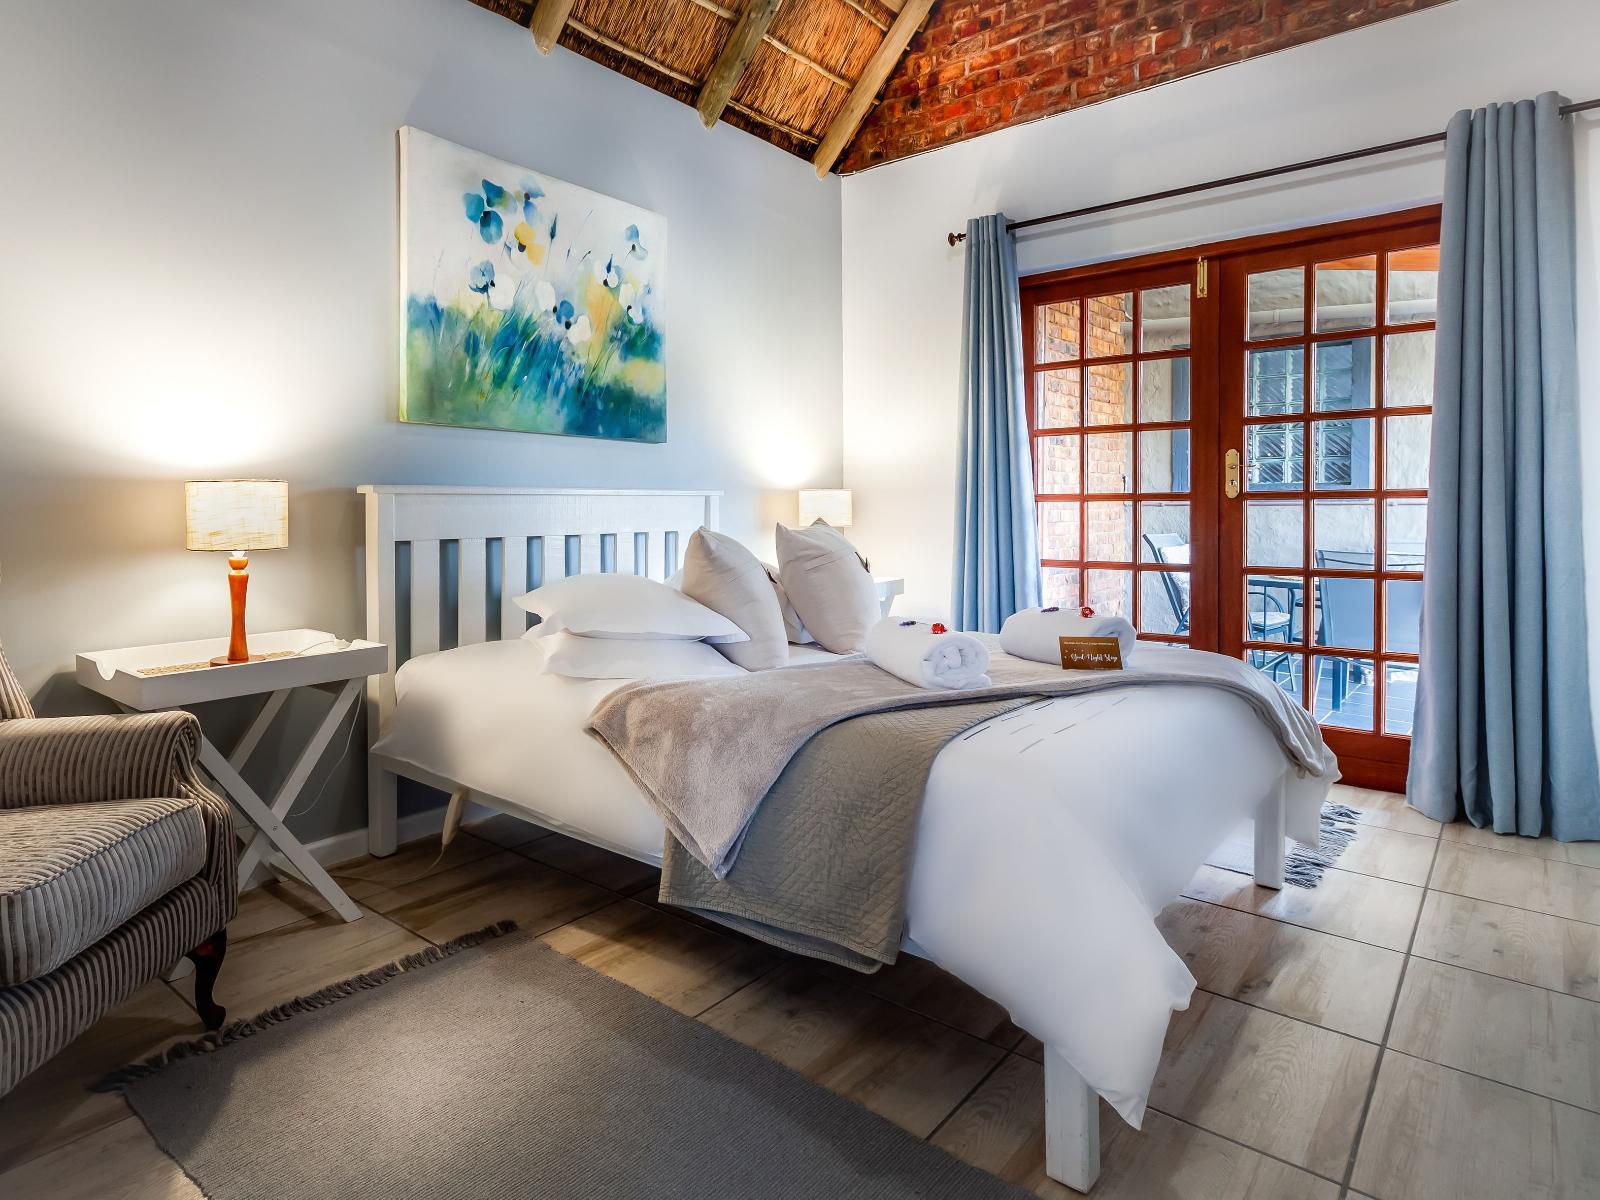 The Owls Inn Country Villa S And Spa Glentana Great Brak River Western Cape South Africa Bedroom